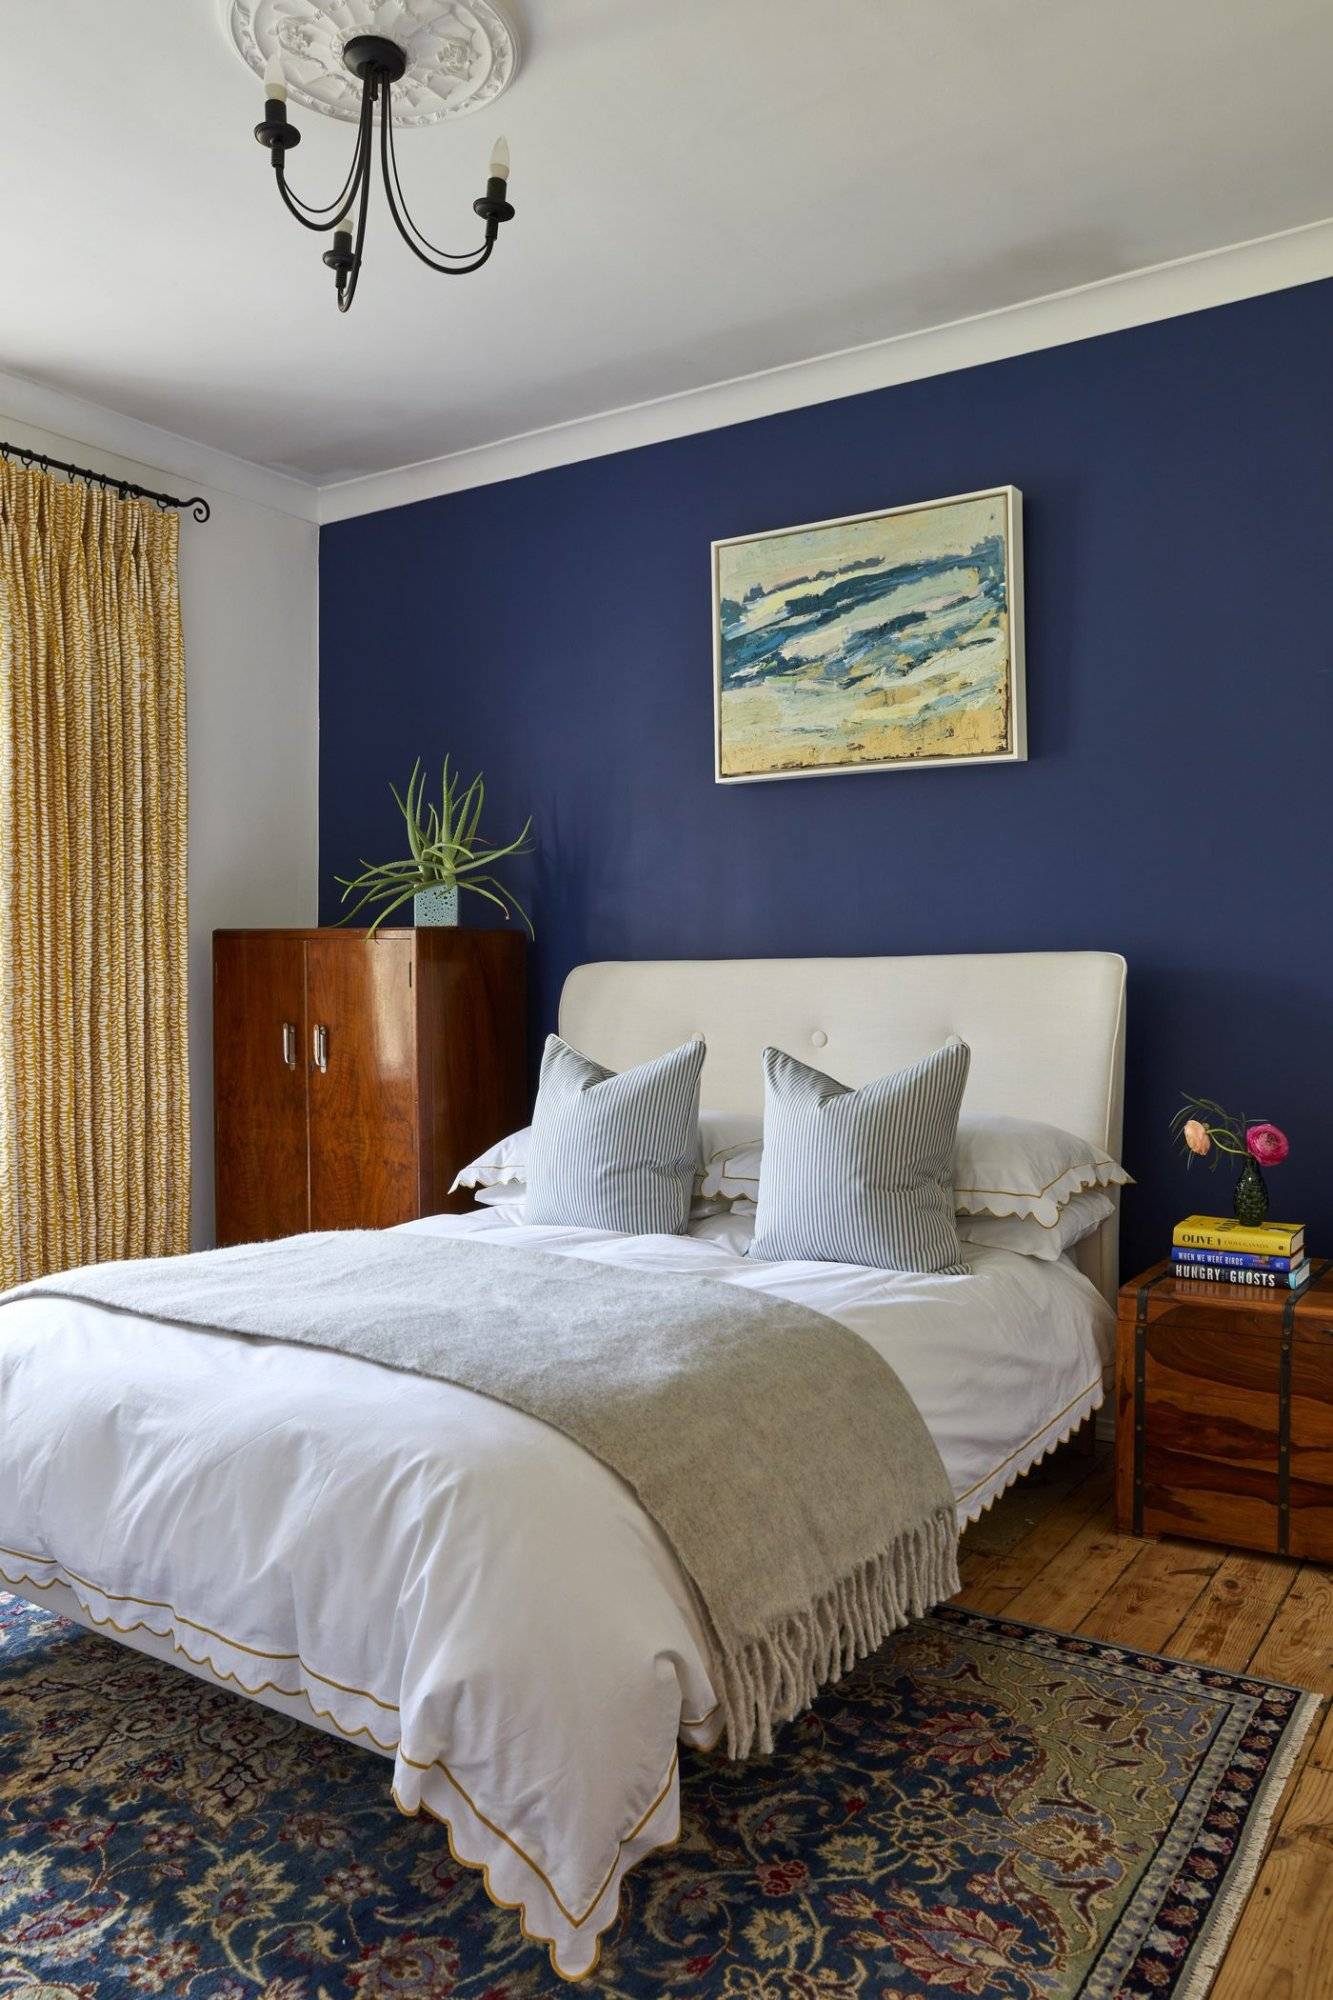 A bedroom with blue walls and a rug on the floor.